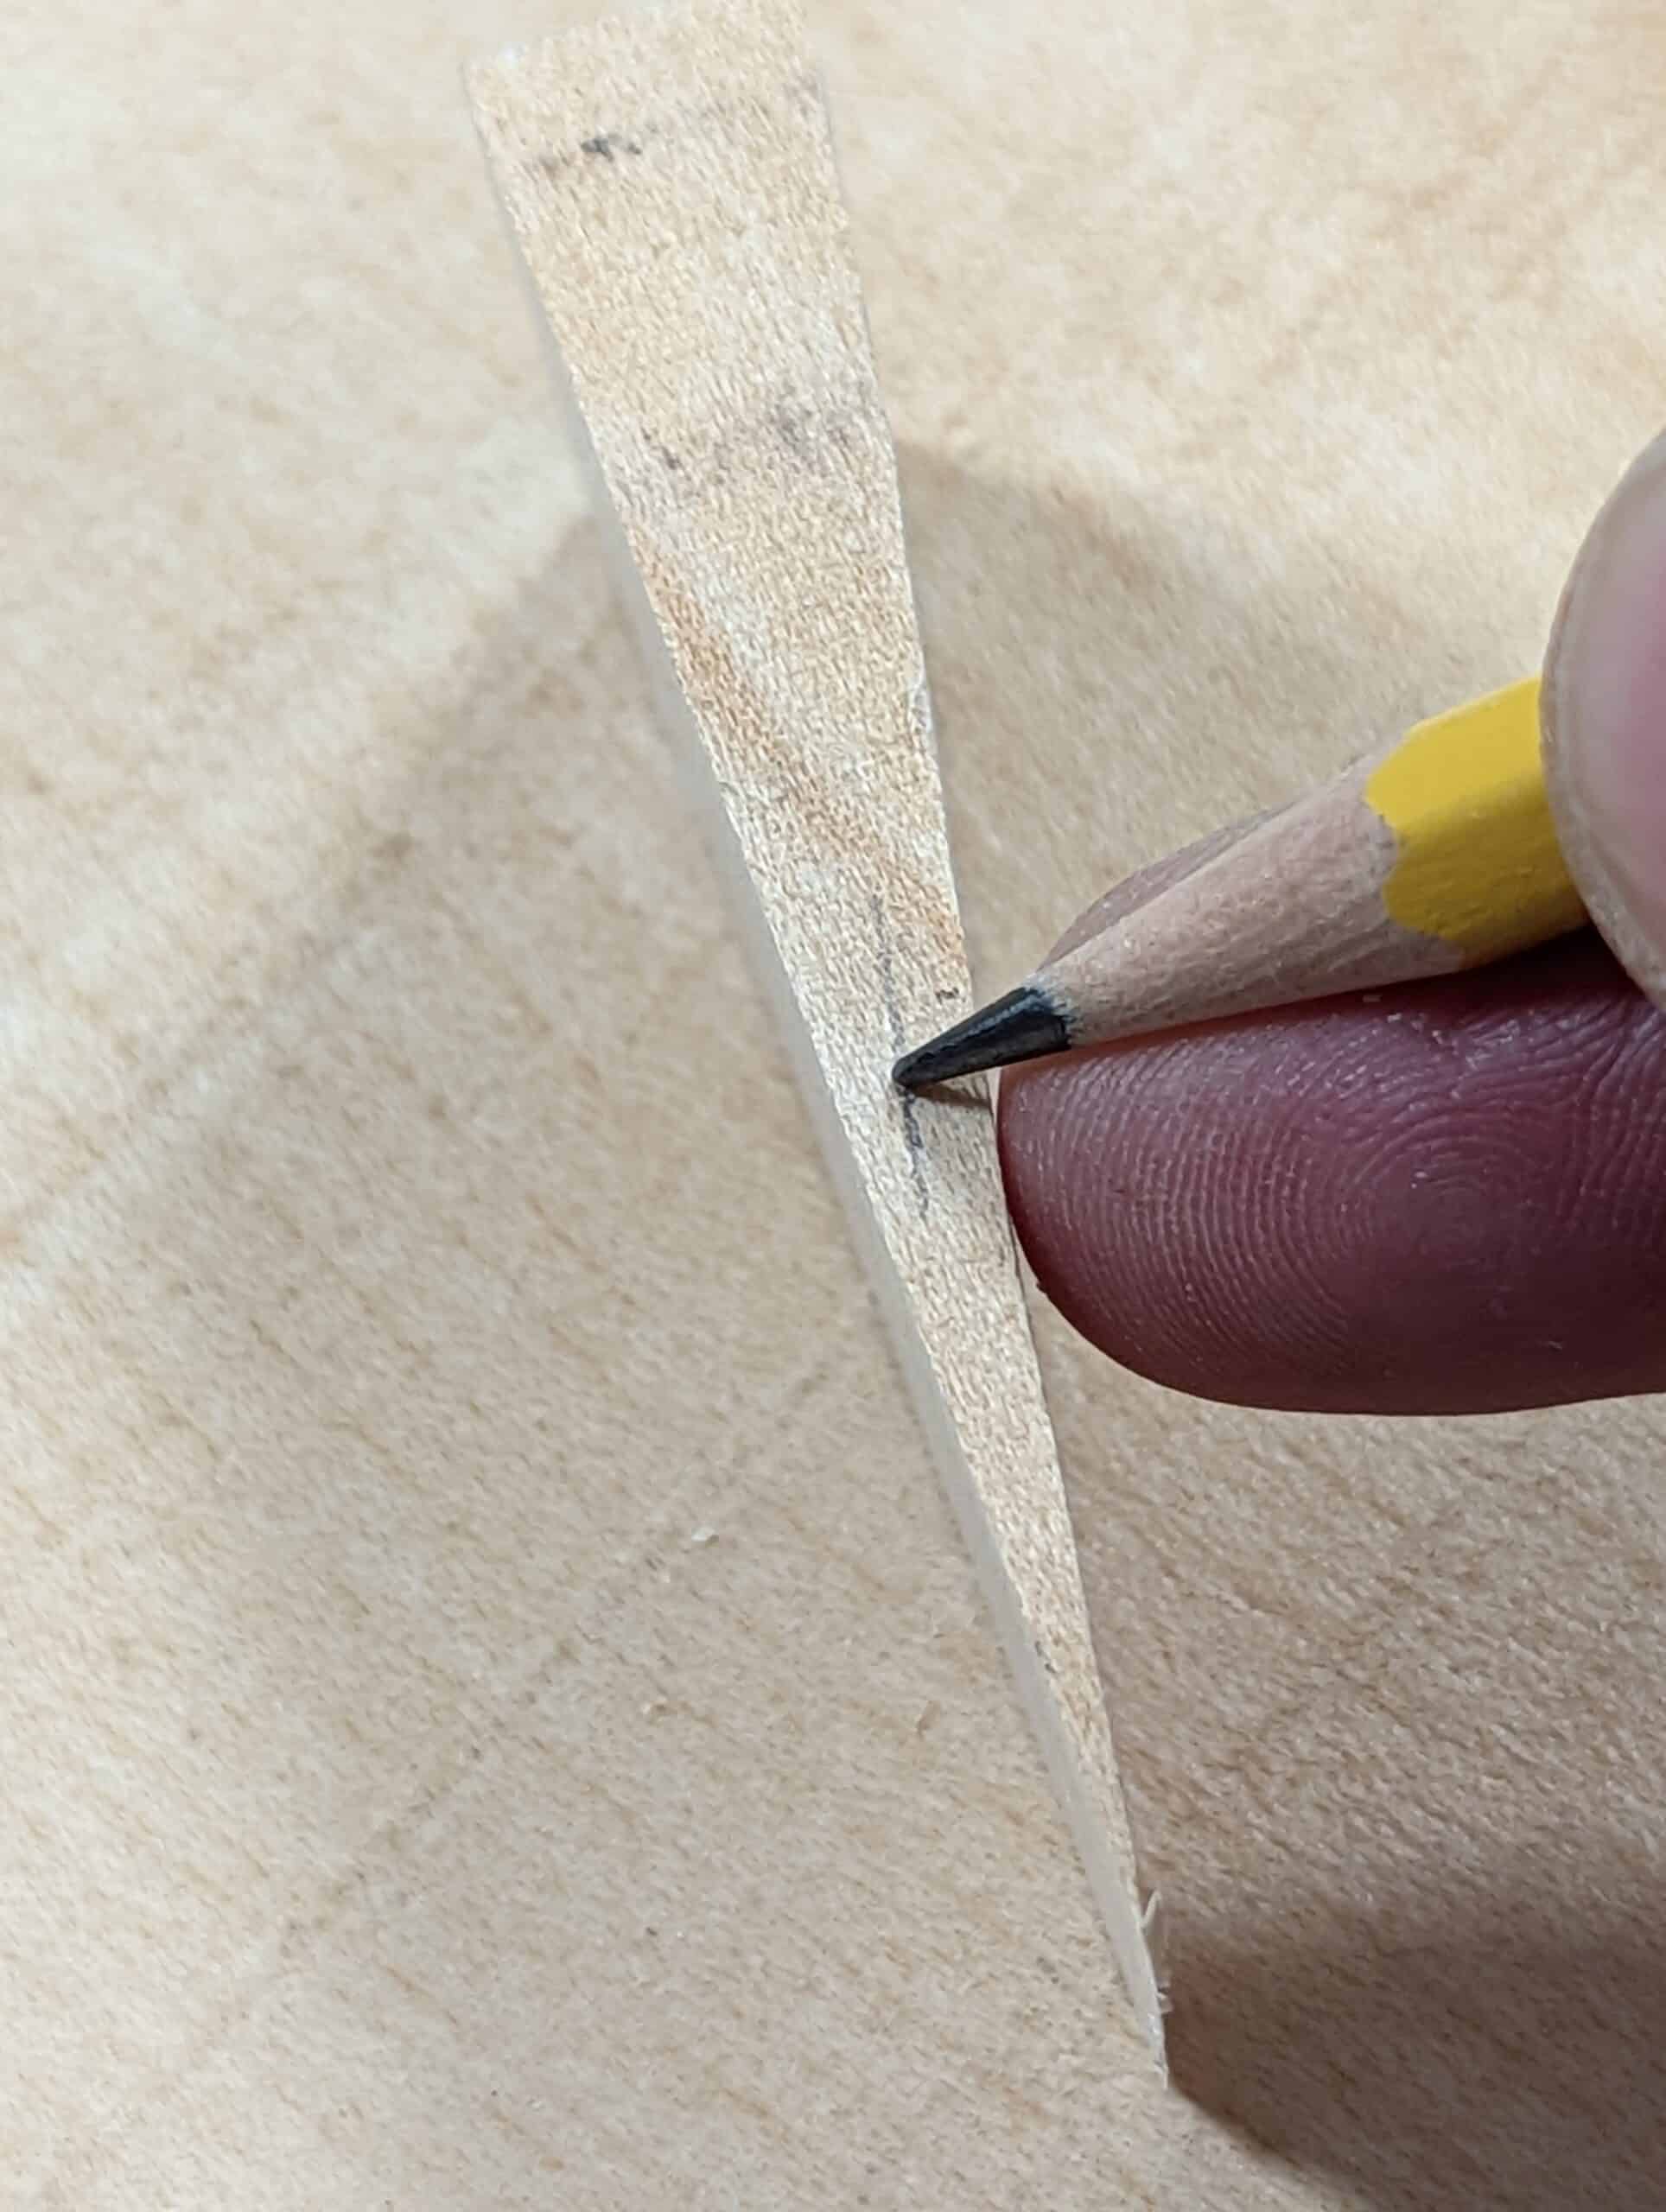 Twisted pencil marking knife for woodworking